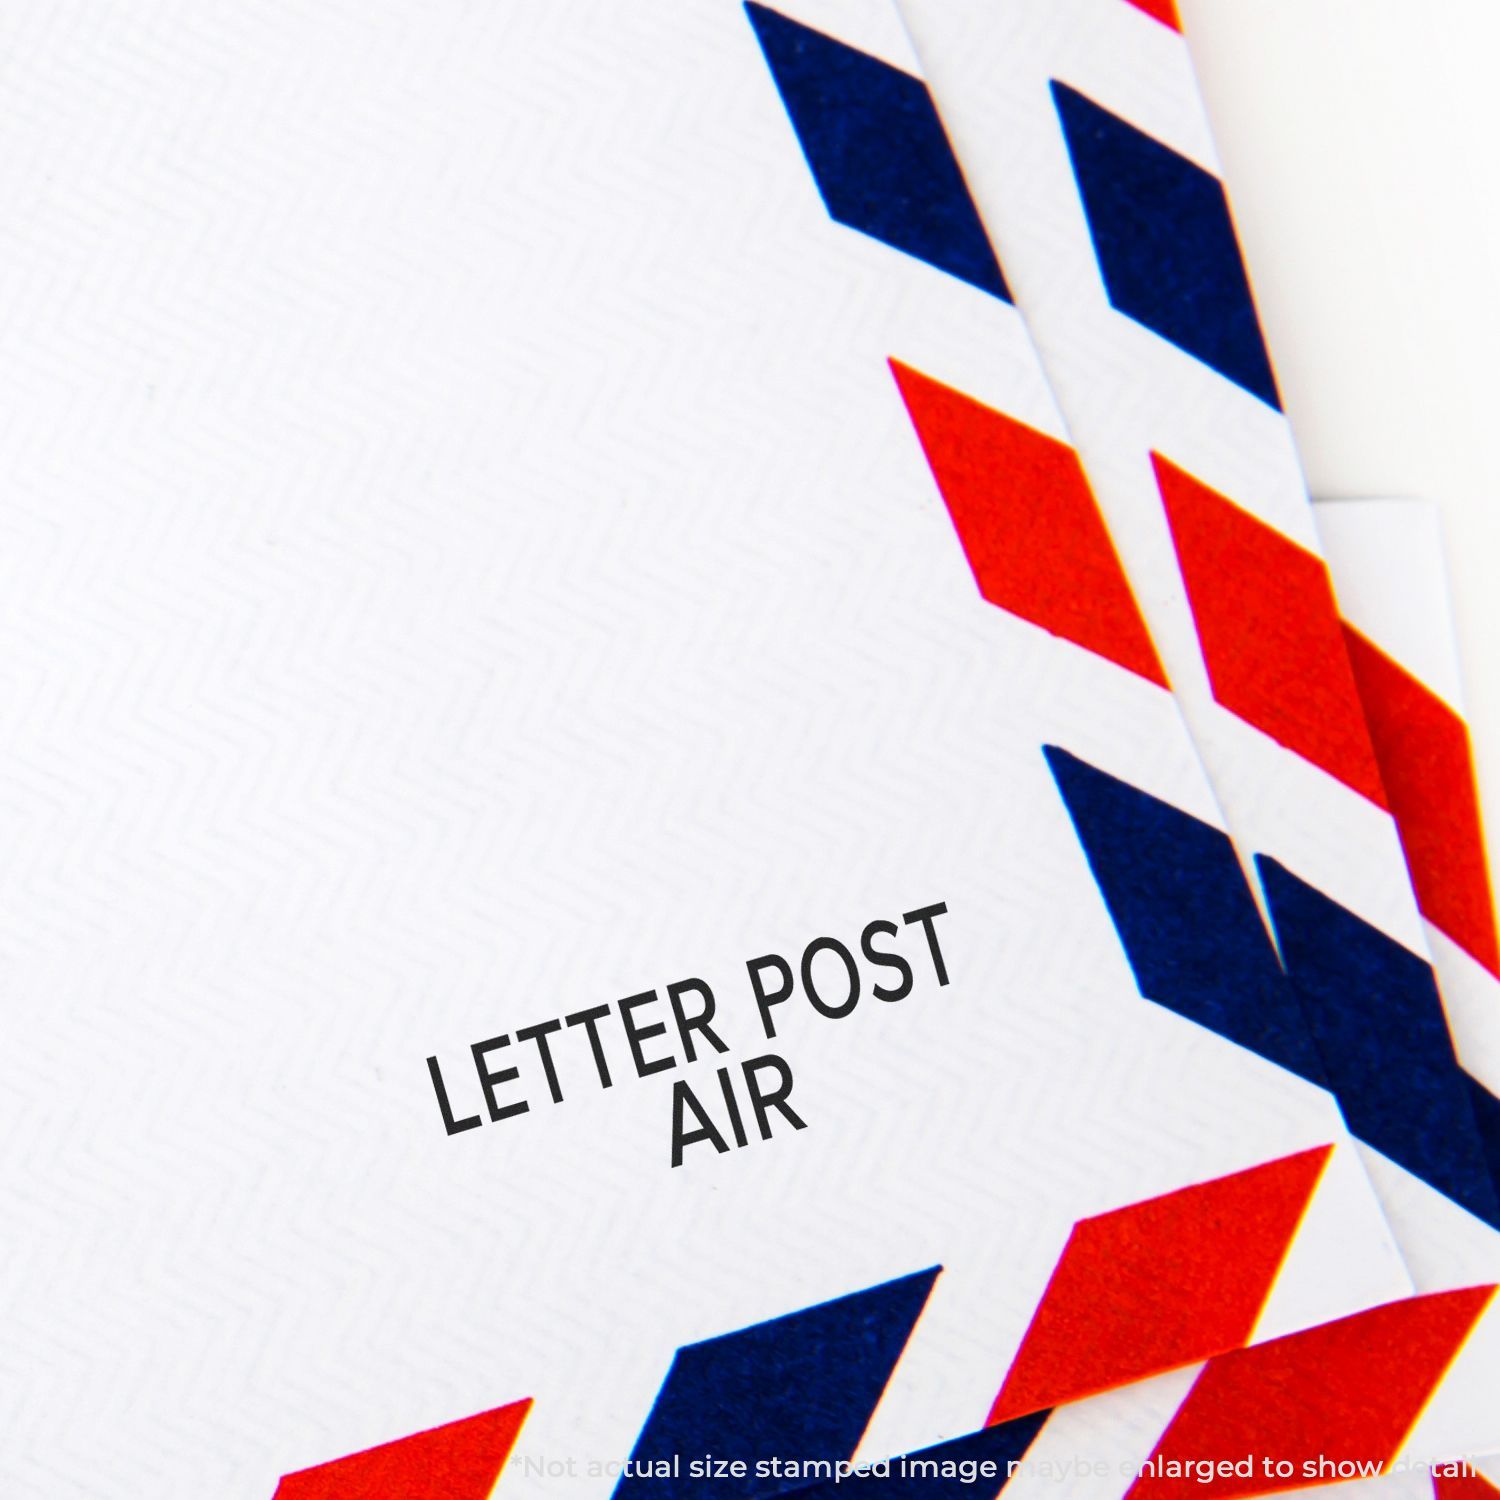 A self-inking stamp with a stamped image showing how the text "LETTER POST AIR" is displayed after stamping.